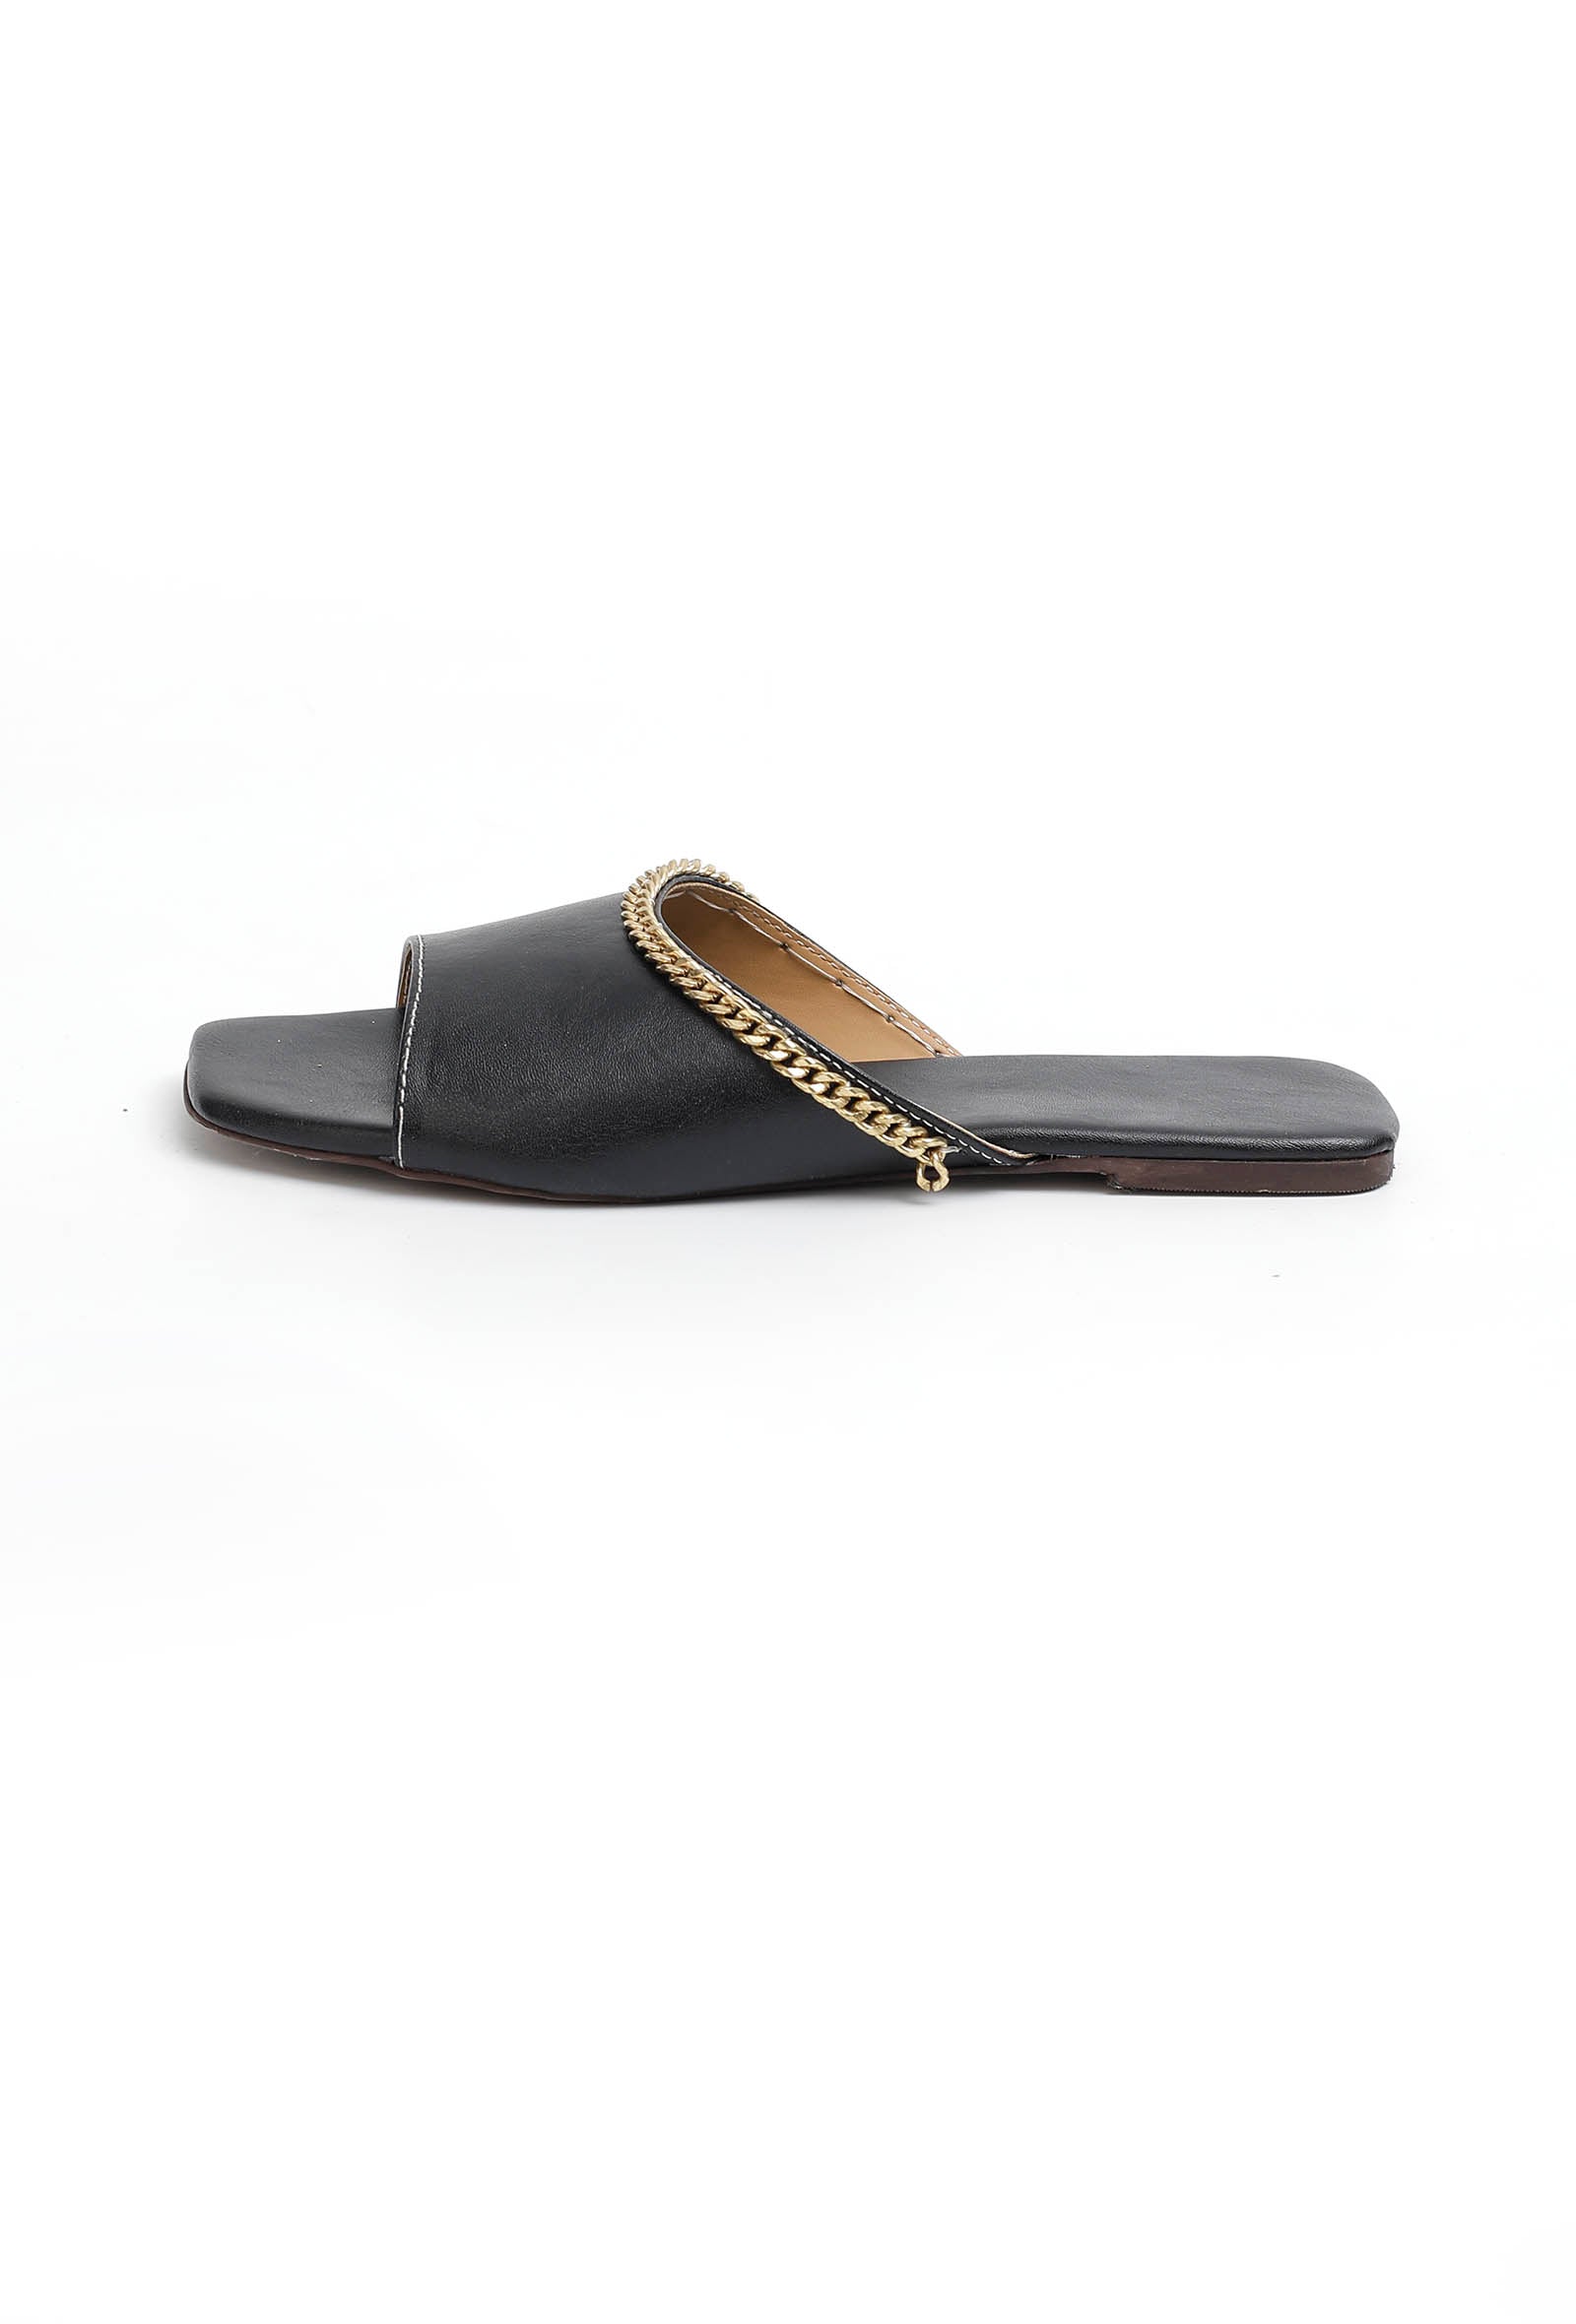 Charcoal Black Cruelty-Free Leather Flats